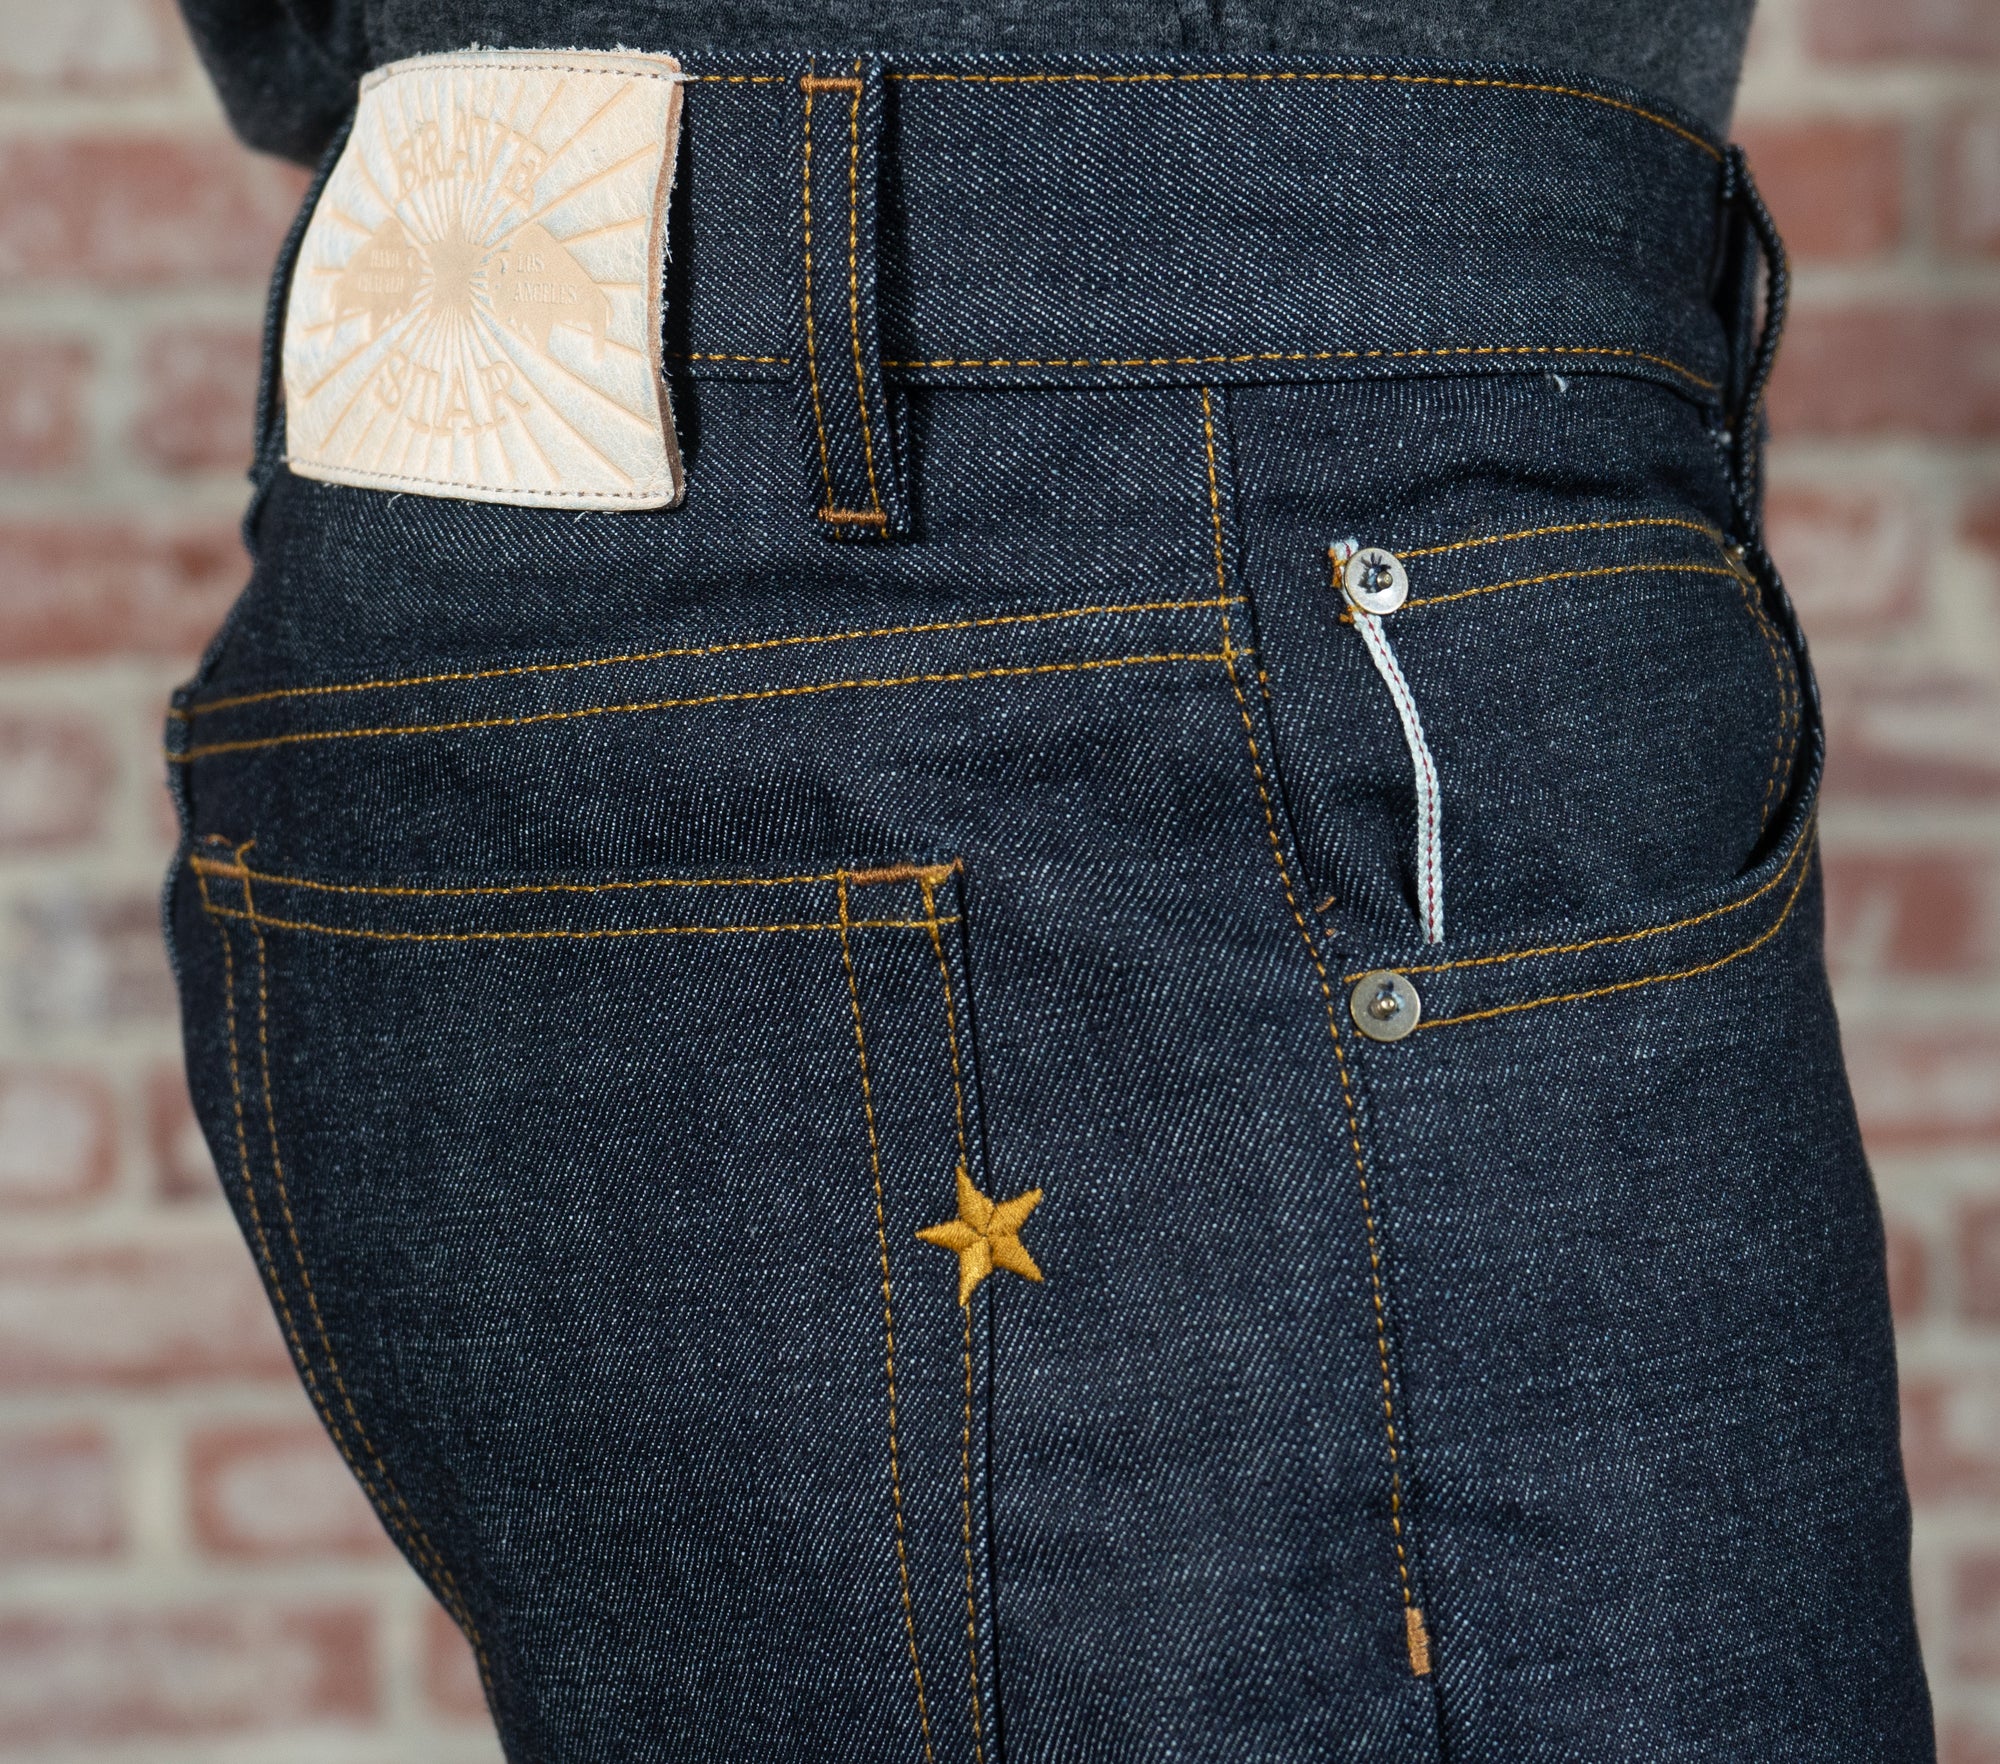 Brave Star Selvage - Fades